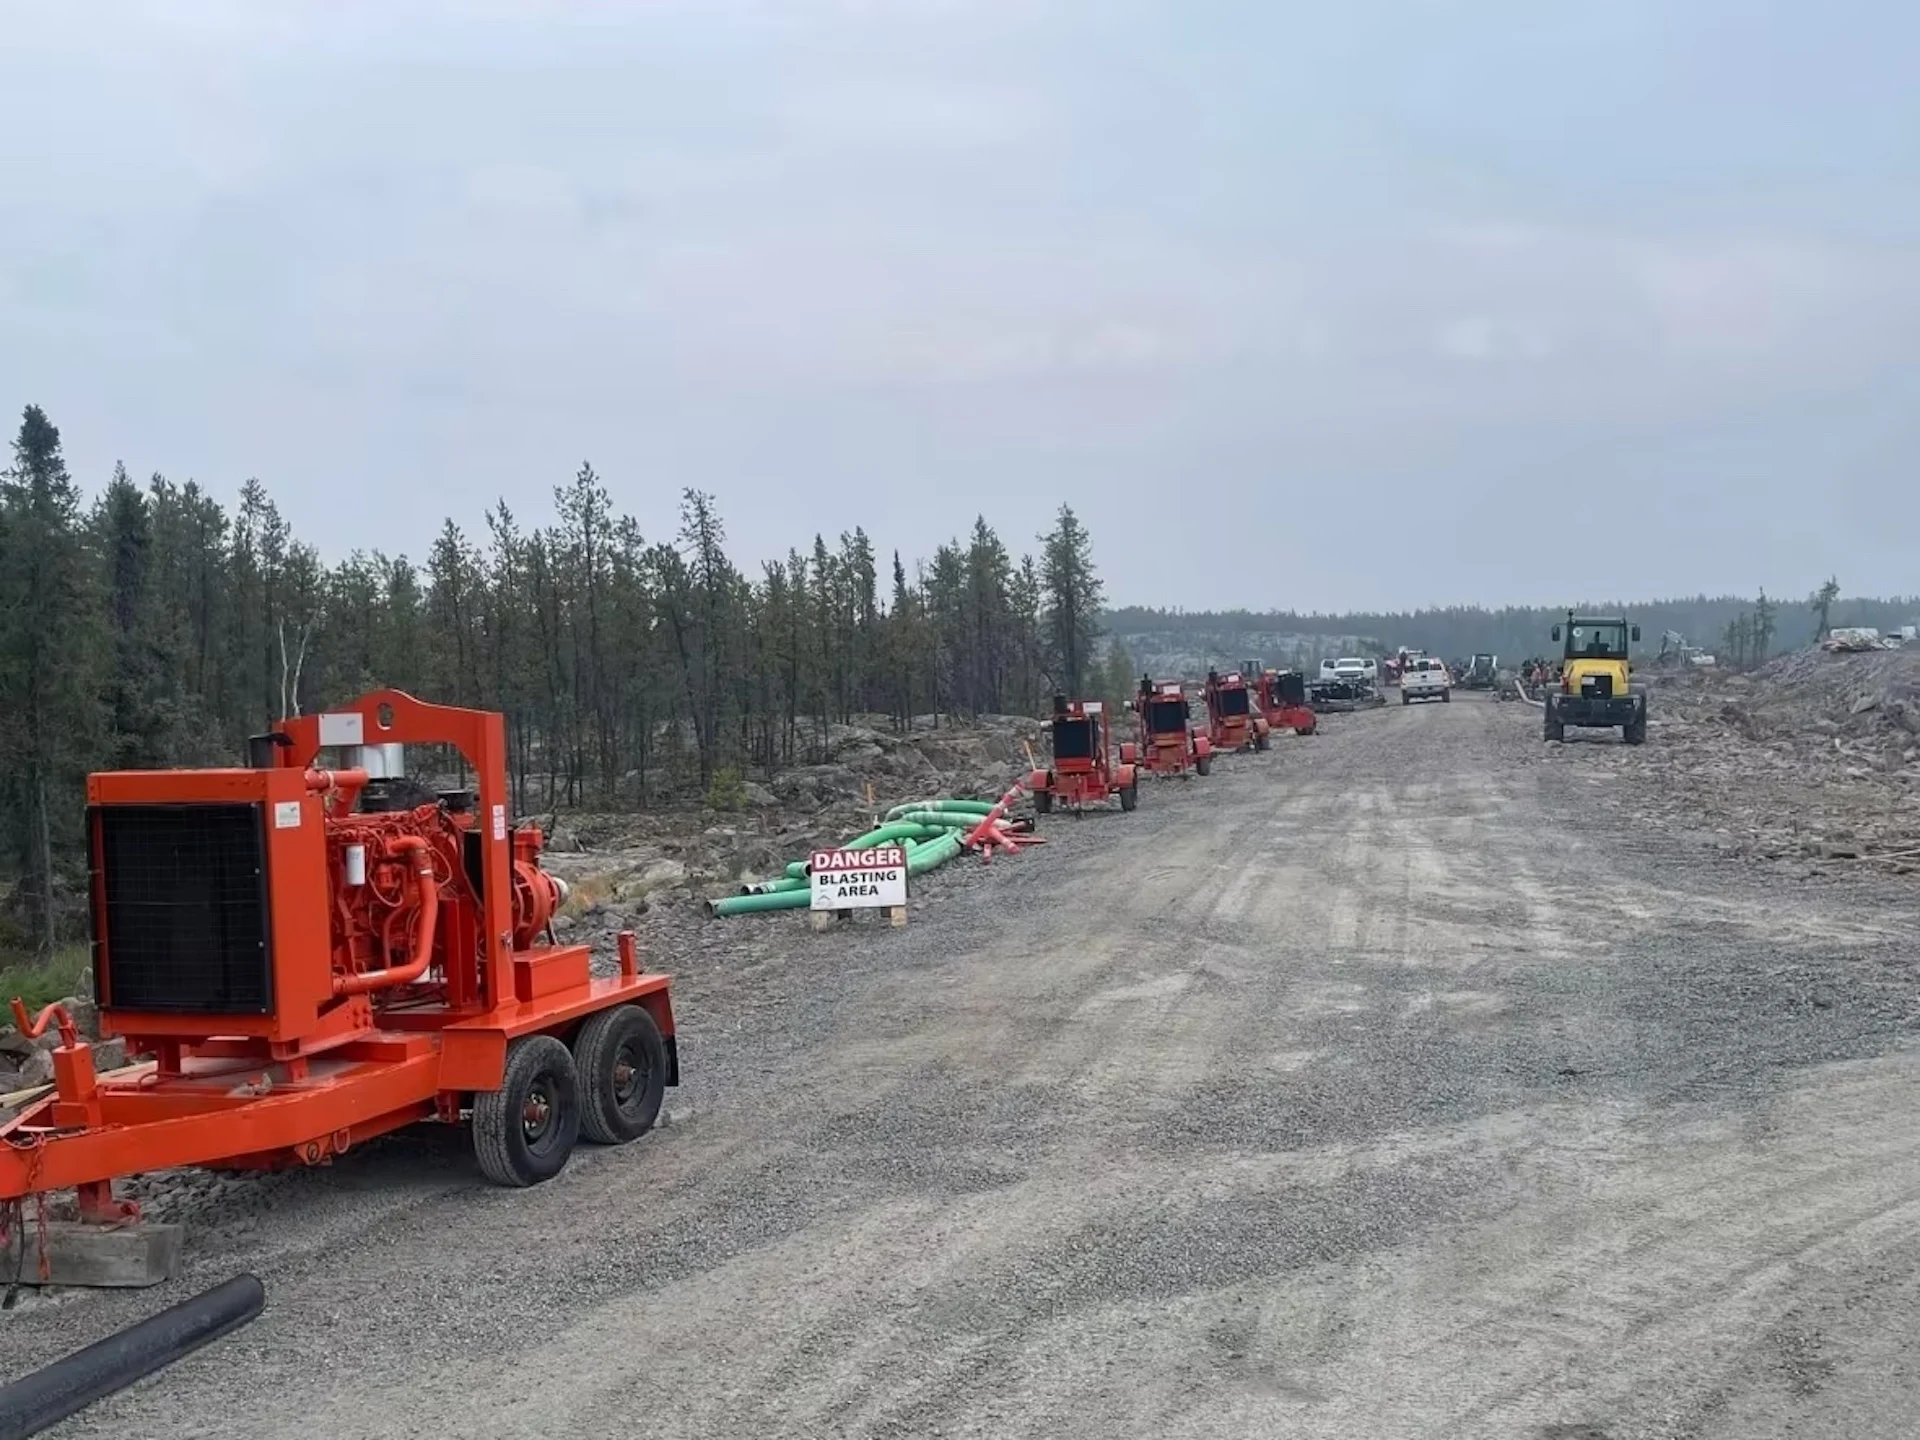 Co-ordination is key in effort to keep Yellowknife safe from wildfire: Official